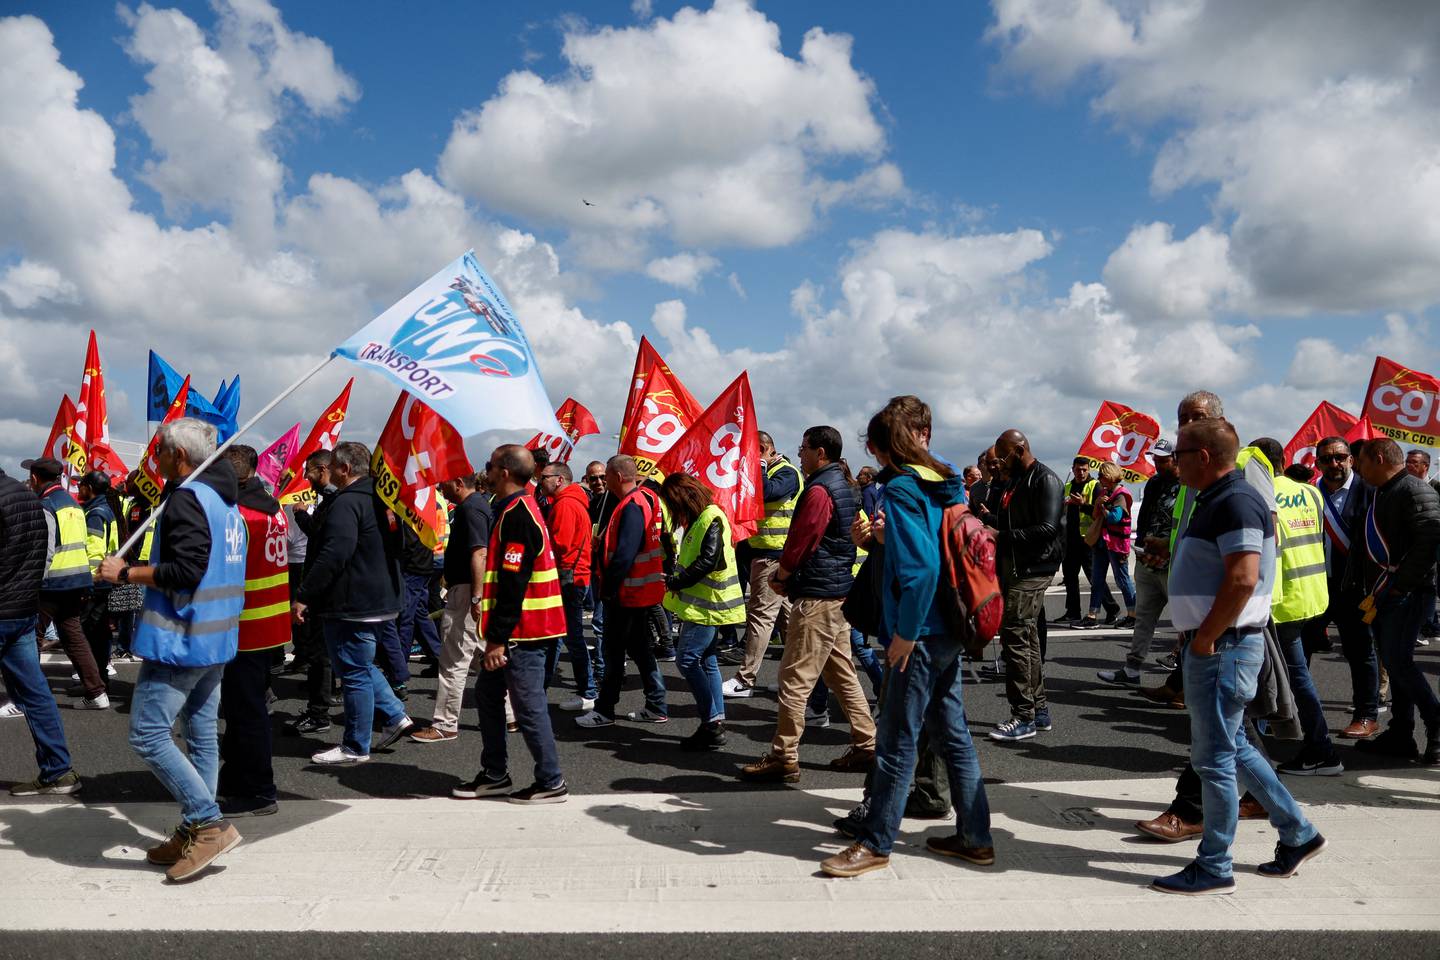 Paris-Charles de Gaulle airport employees protest over low wages. Reuters